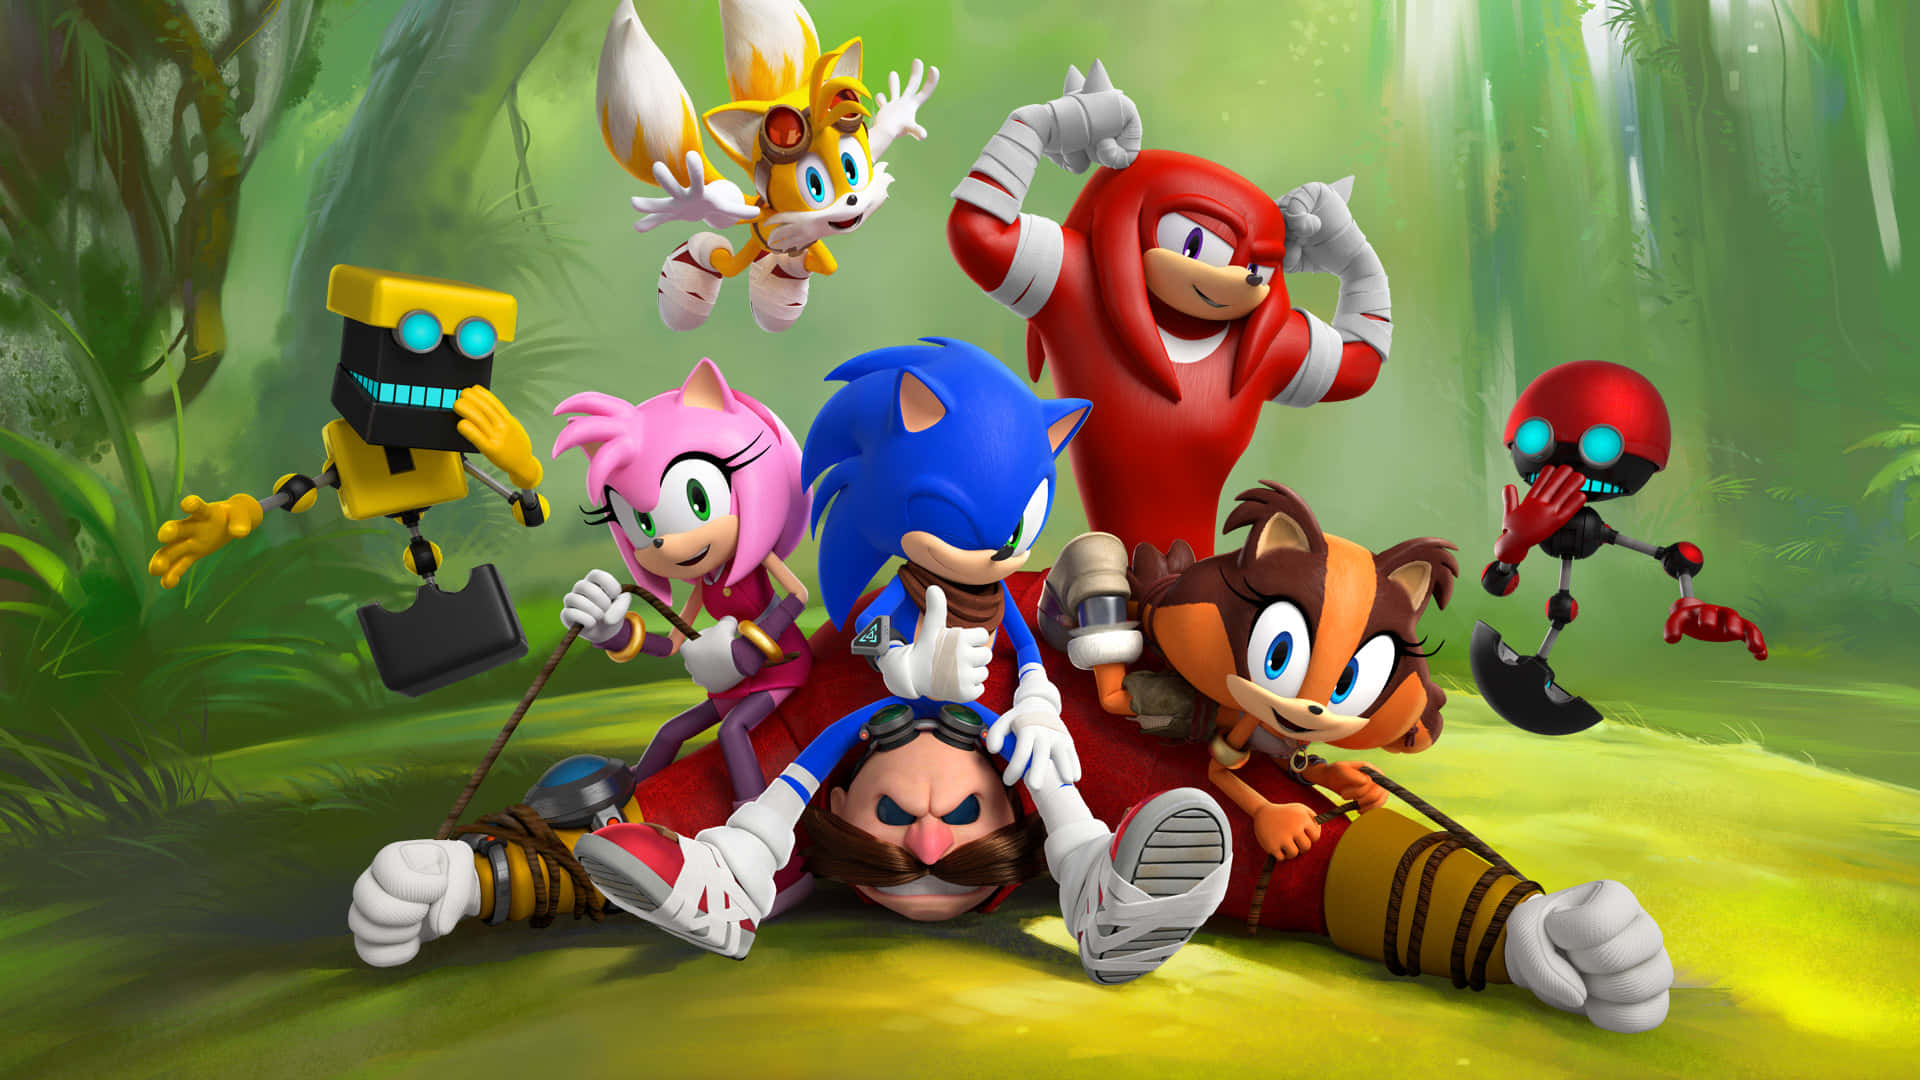 A powerful sonic boom in action Wallpaper